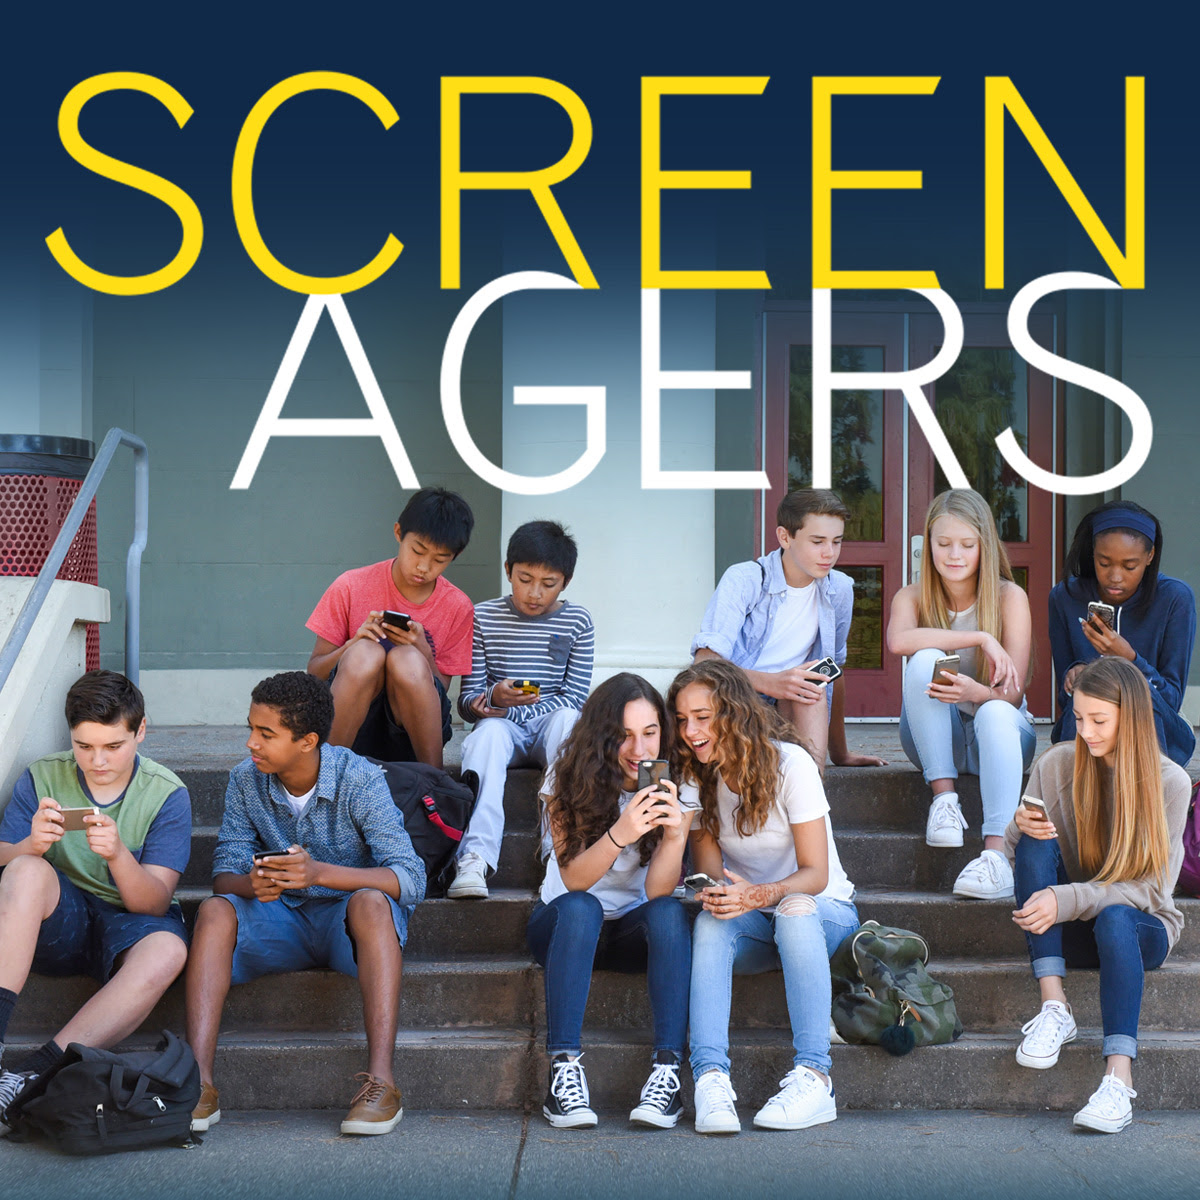 Screenagers Film Presented By JHS 157 Halsey